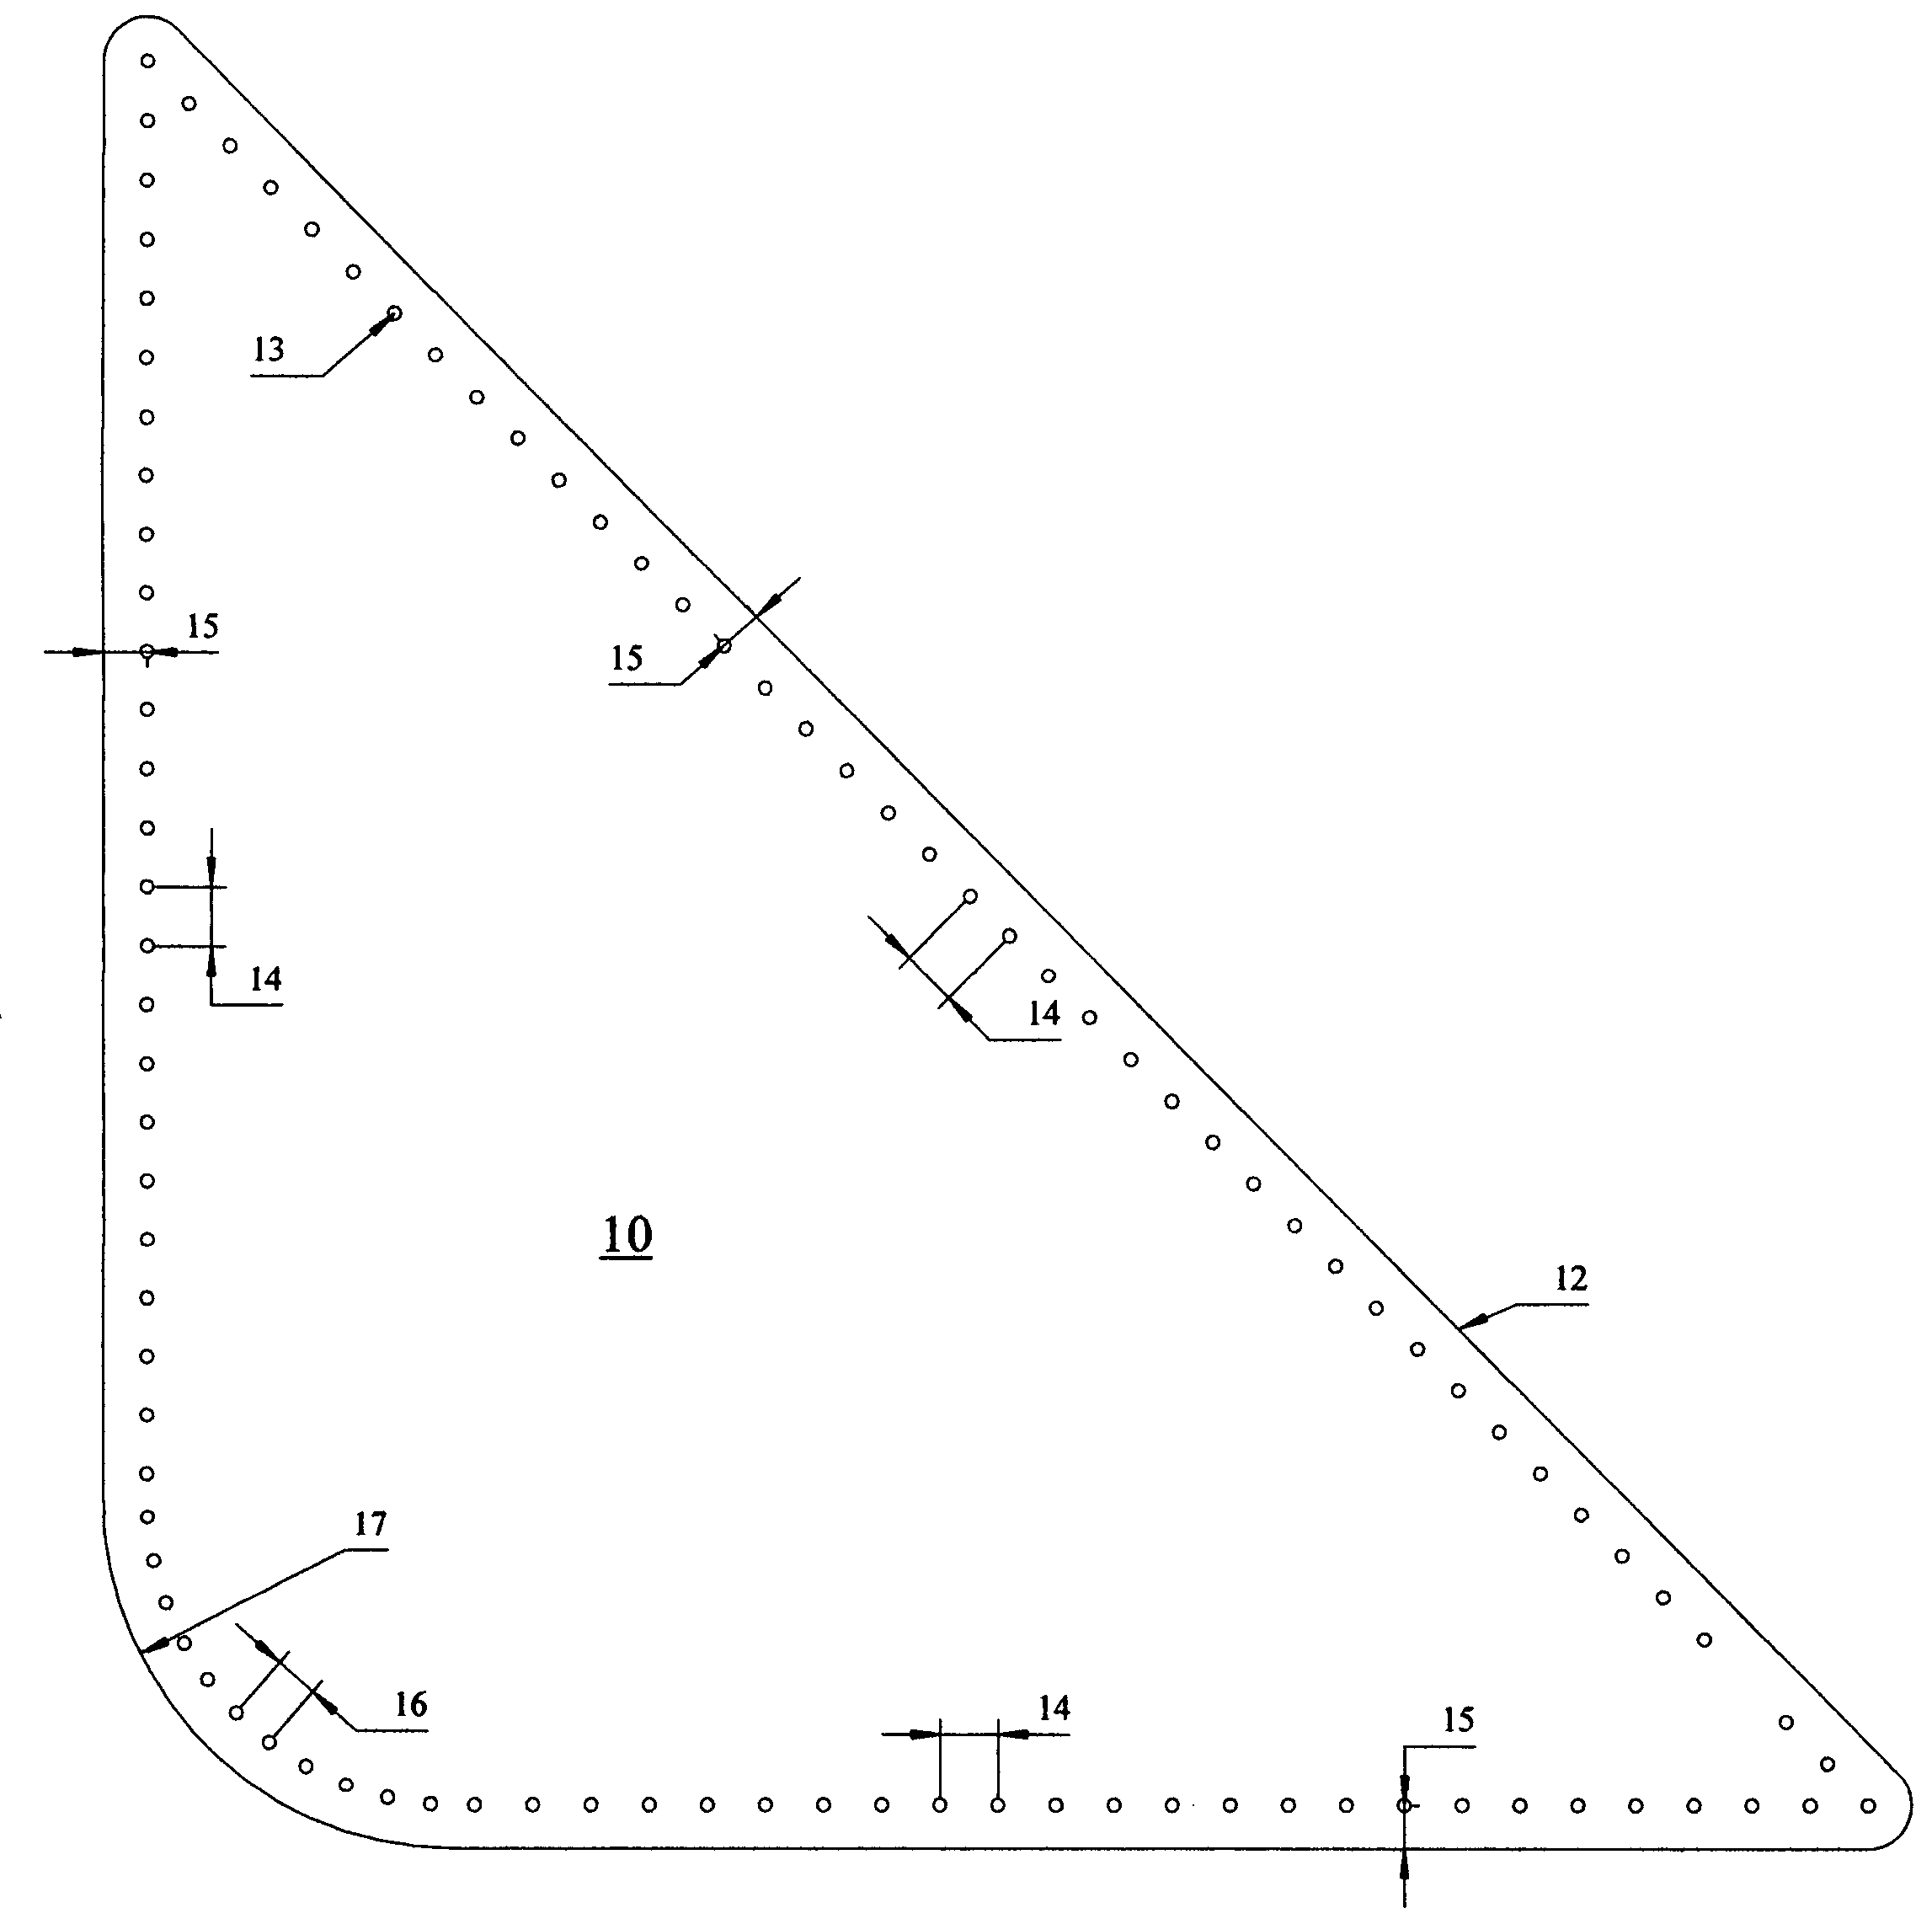 Template and method to prepare various fabrics to receive a decorative edging